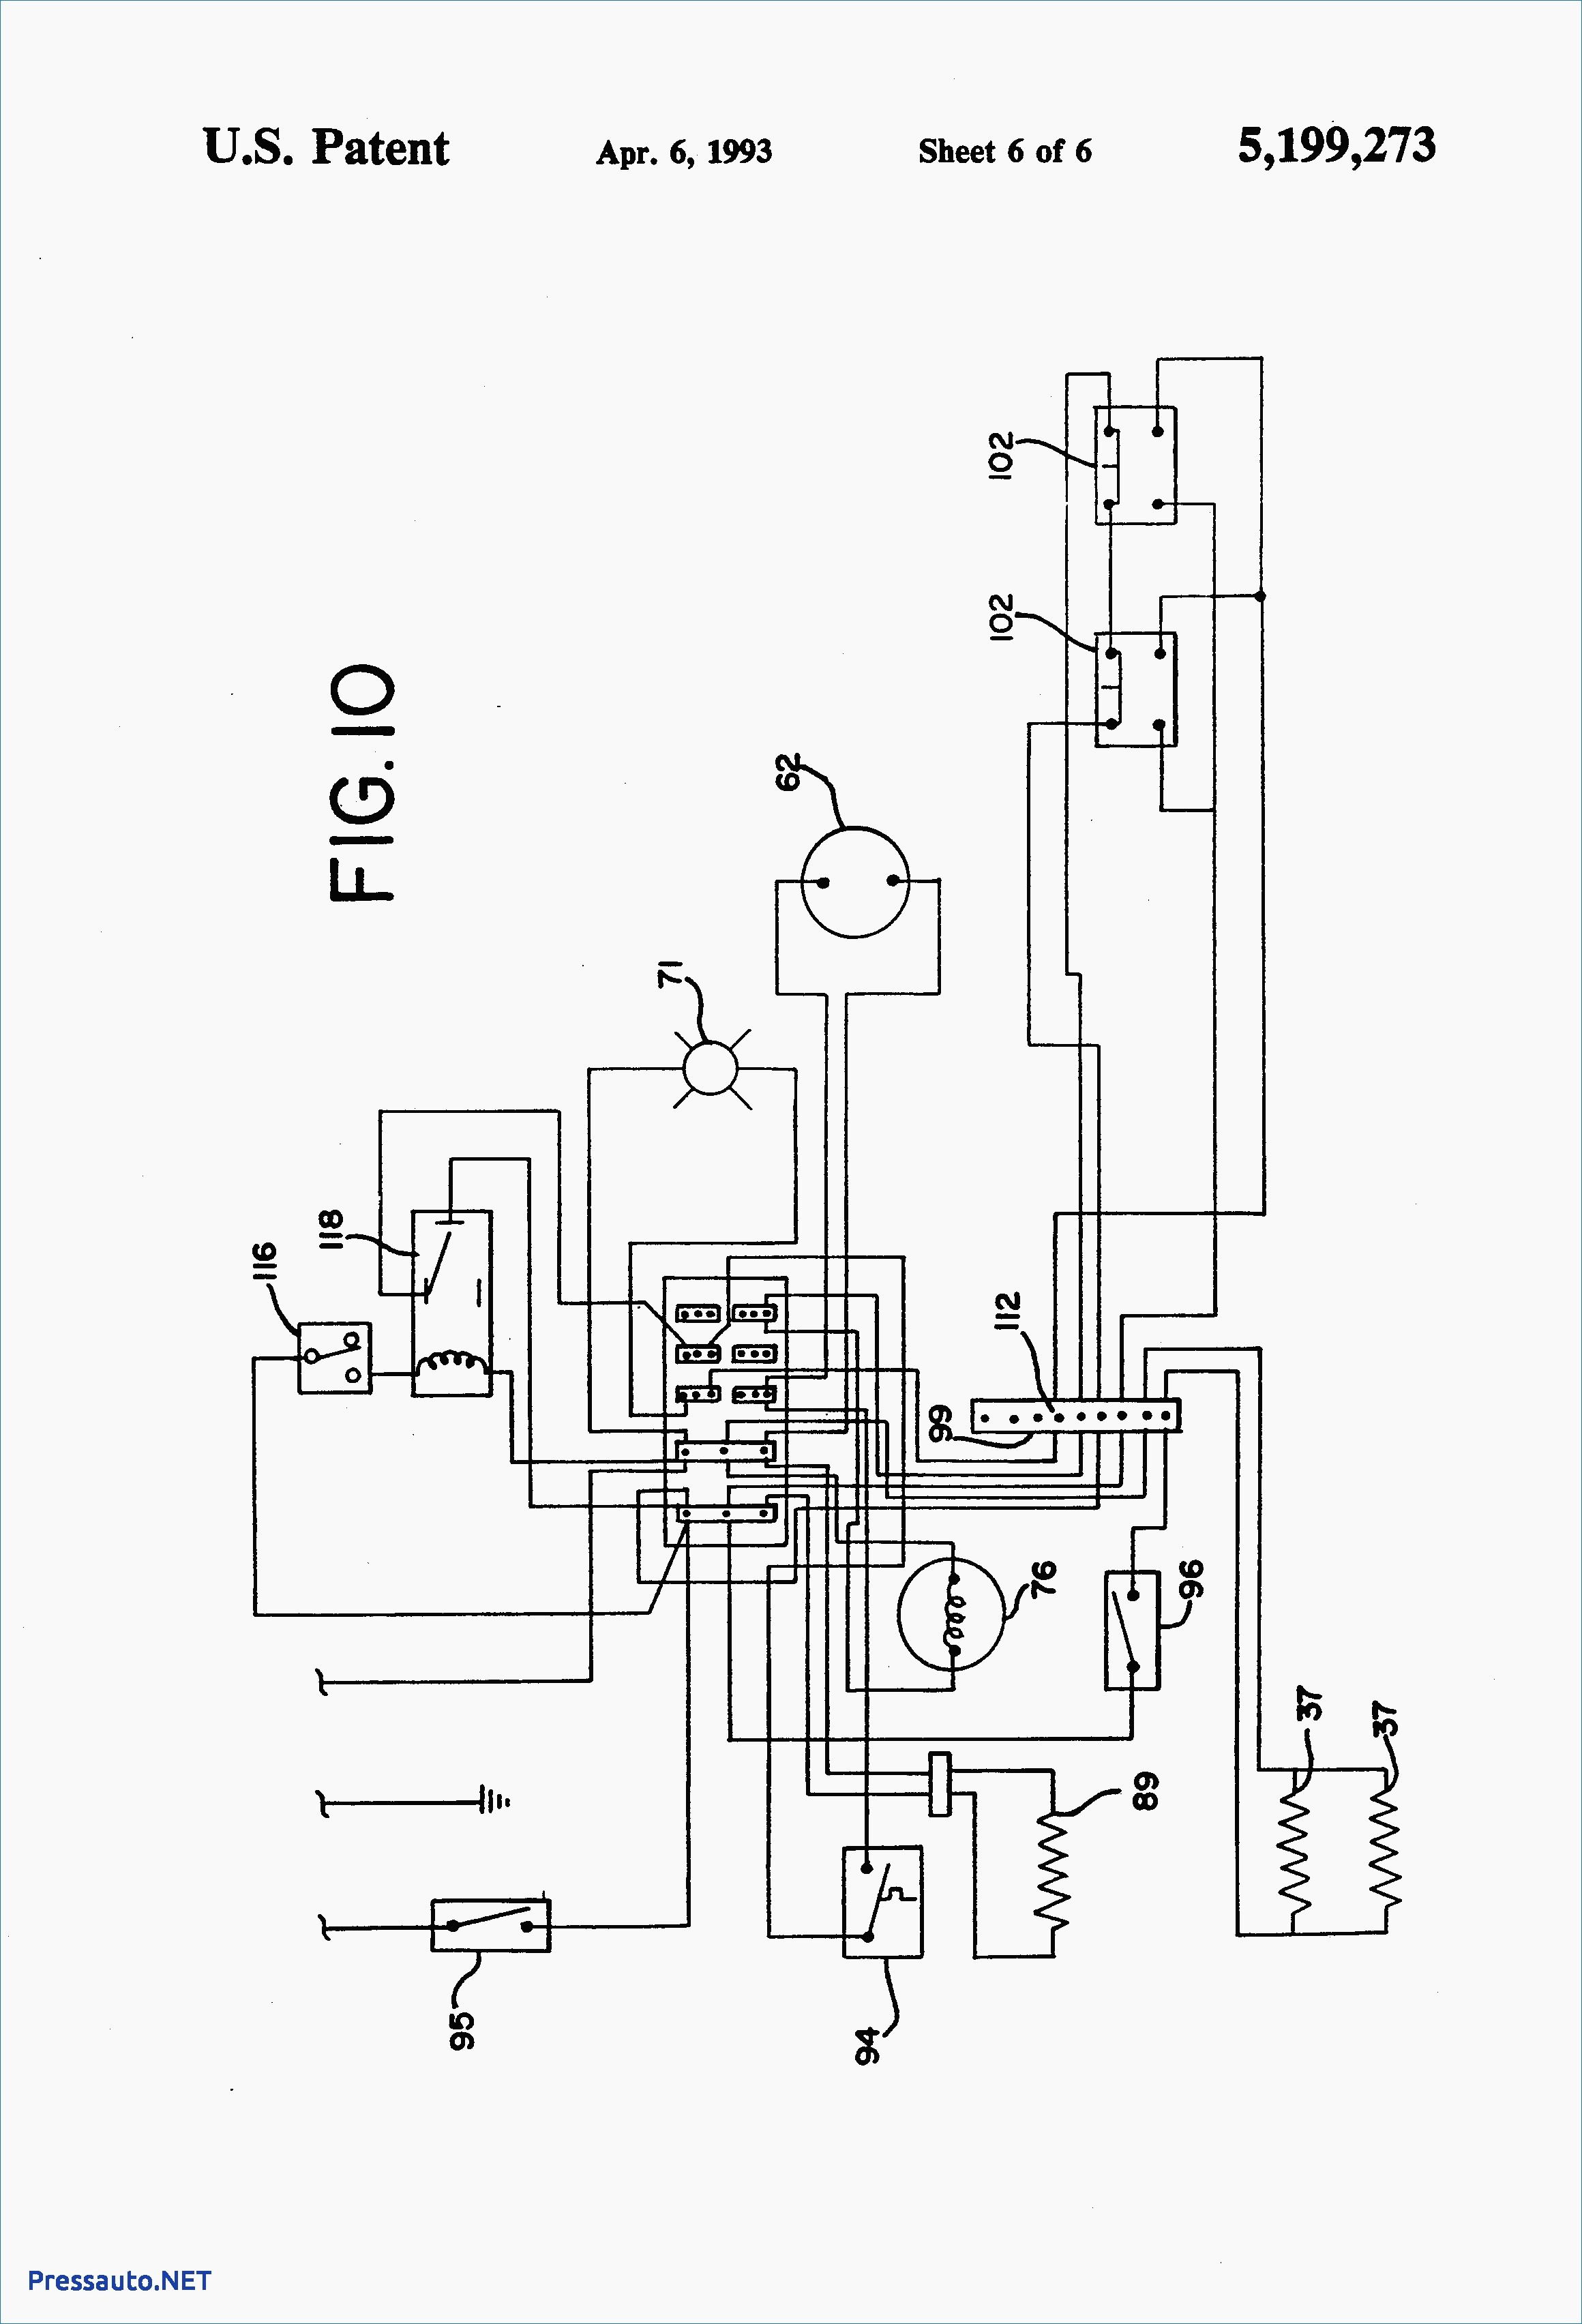 Paragon Defrost Timer 8145 20 Wiring Diagram Paragonwire Bunch Ideas In Dia